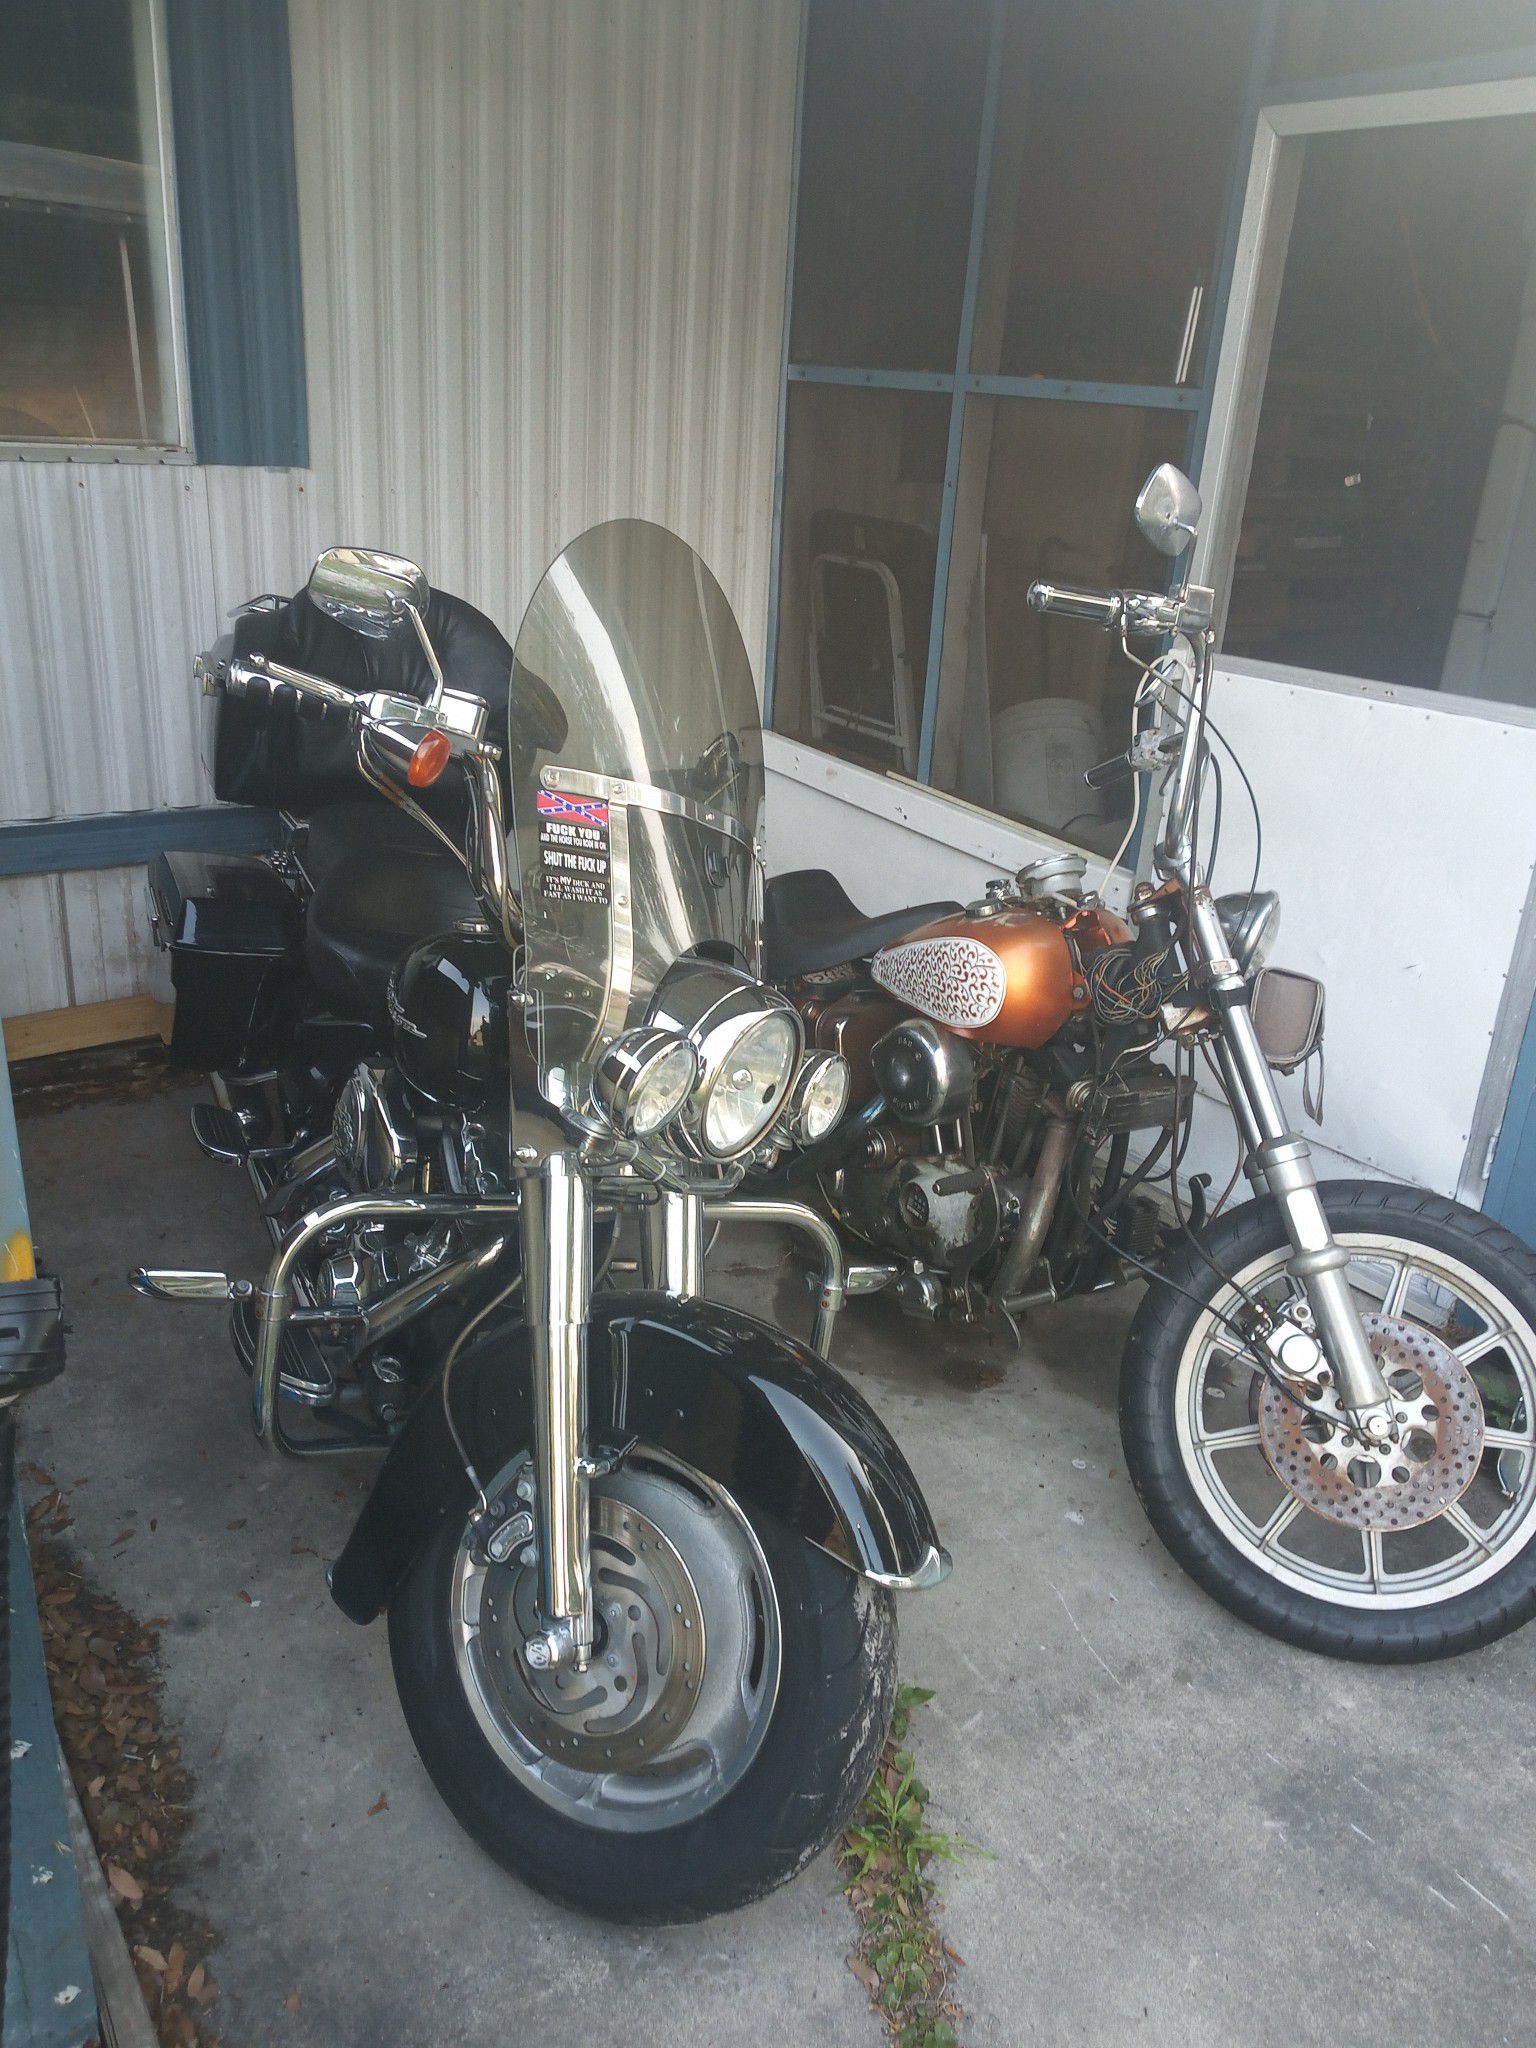 4 bikes for sale